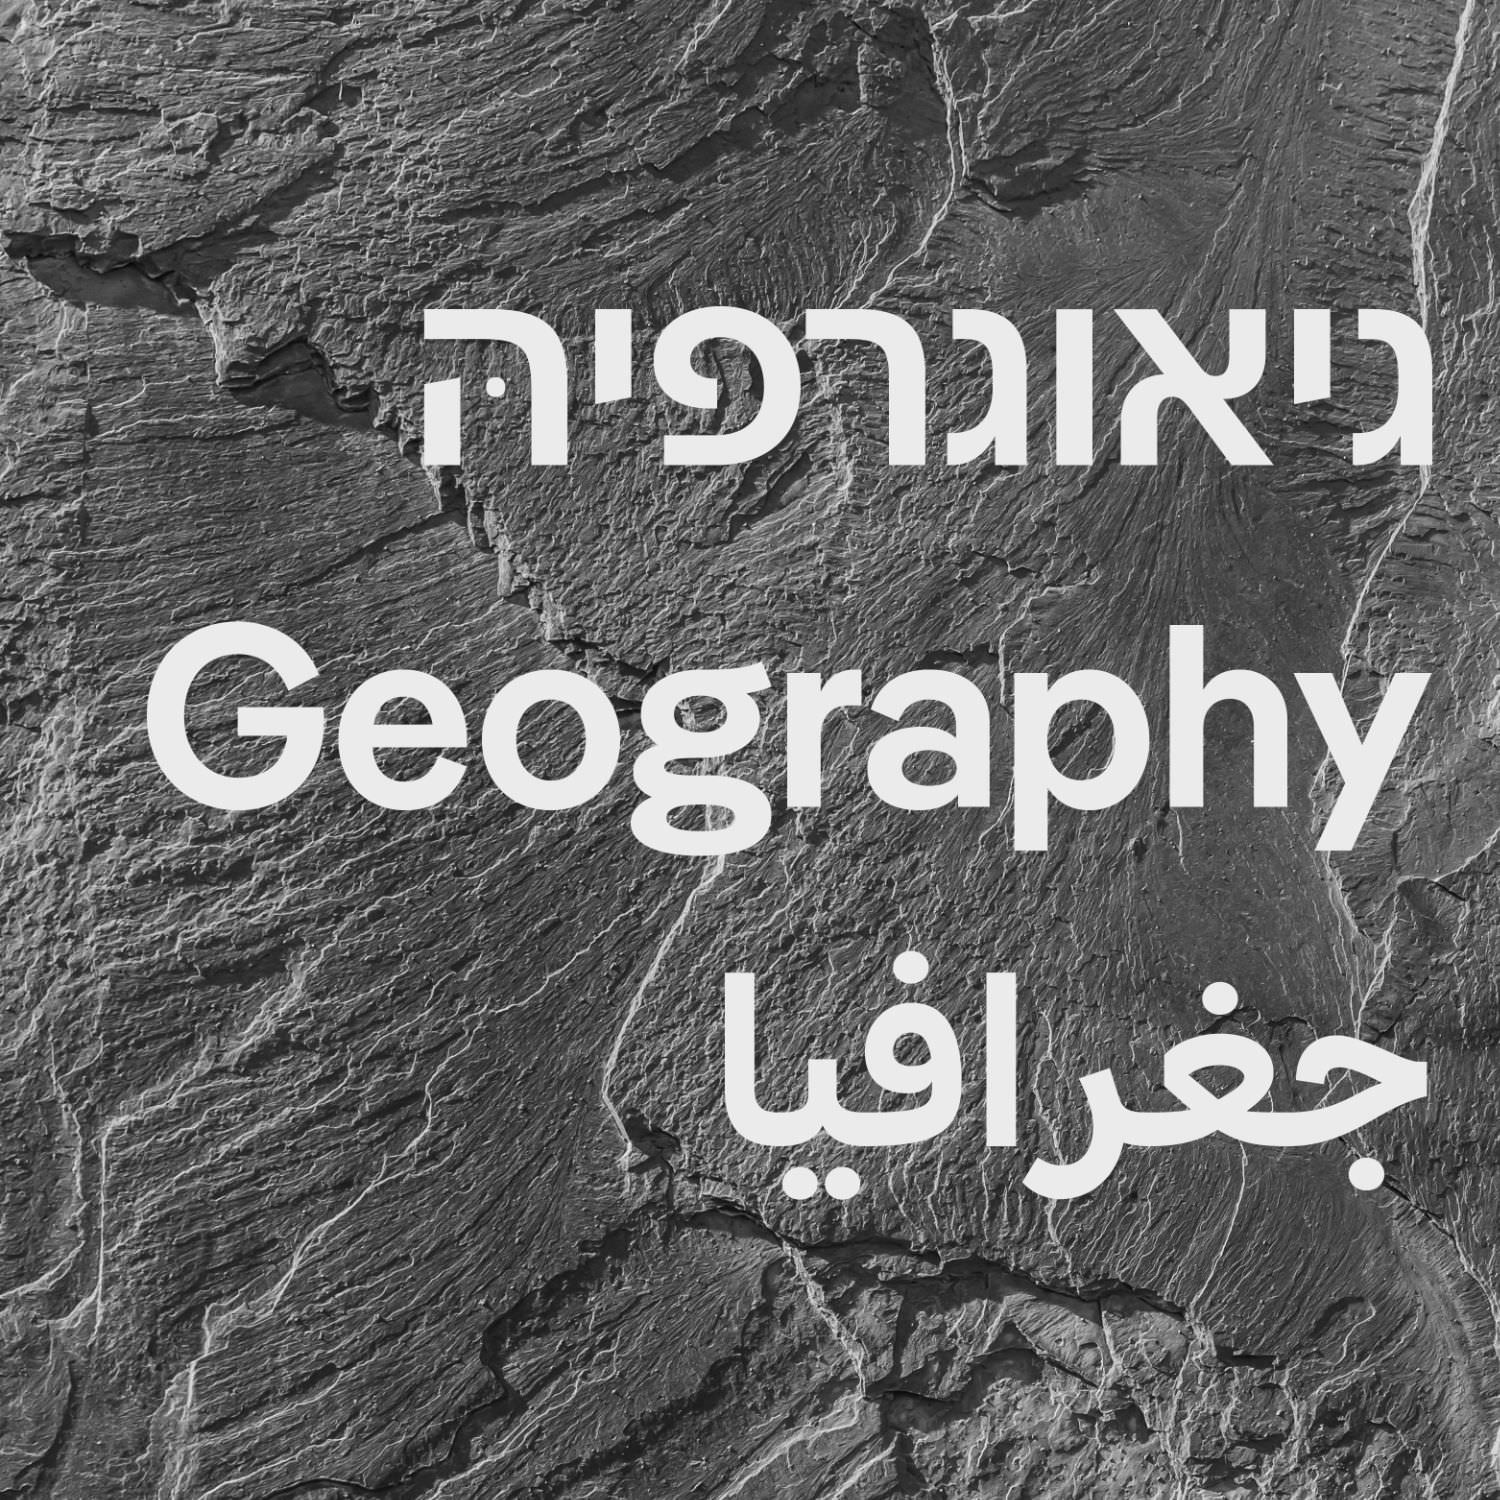 Pangea Arabic and Hebrew are coming soon